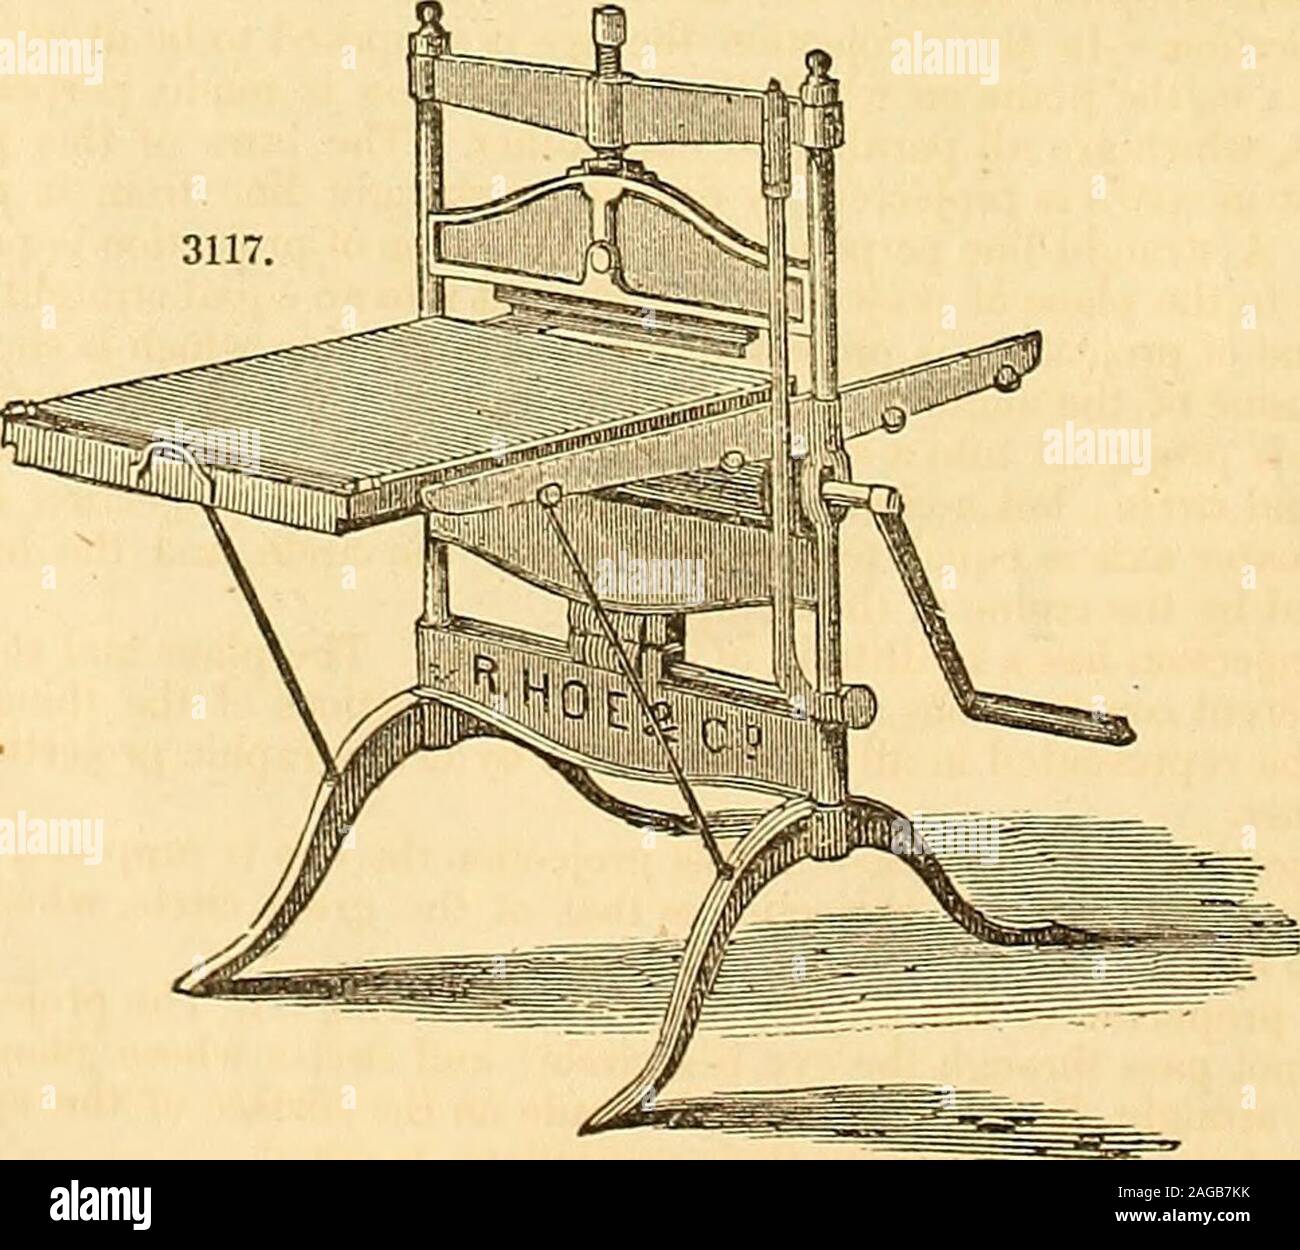 . Appleton's dictionary of machines, mechanics, engine-work, and engineering. Improved lithographicpress.—Fig. 3117. This is believed to be the best press in use for lithographicprinting. The side-rods and top beam are made of wrought-iron; the bed and stone are raised to theEcraper by a lever and steel cam, working on a steel friction-roller; the impression is regulated by a. single screw through the top beam; the scraper is hung on a pivot, that it may accommodate itself tcinequalities in the surface of the stone; the bed is made of the toughest ash plated with iron, with iron PROJECTION. 52 Stock Photo